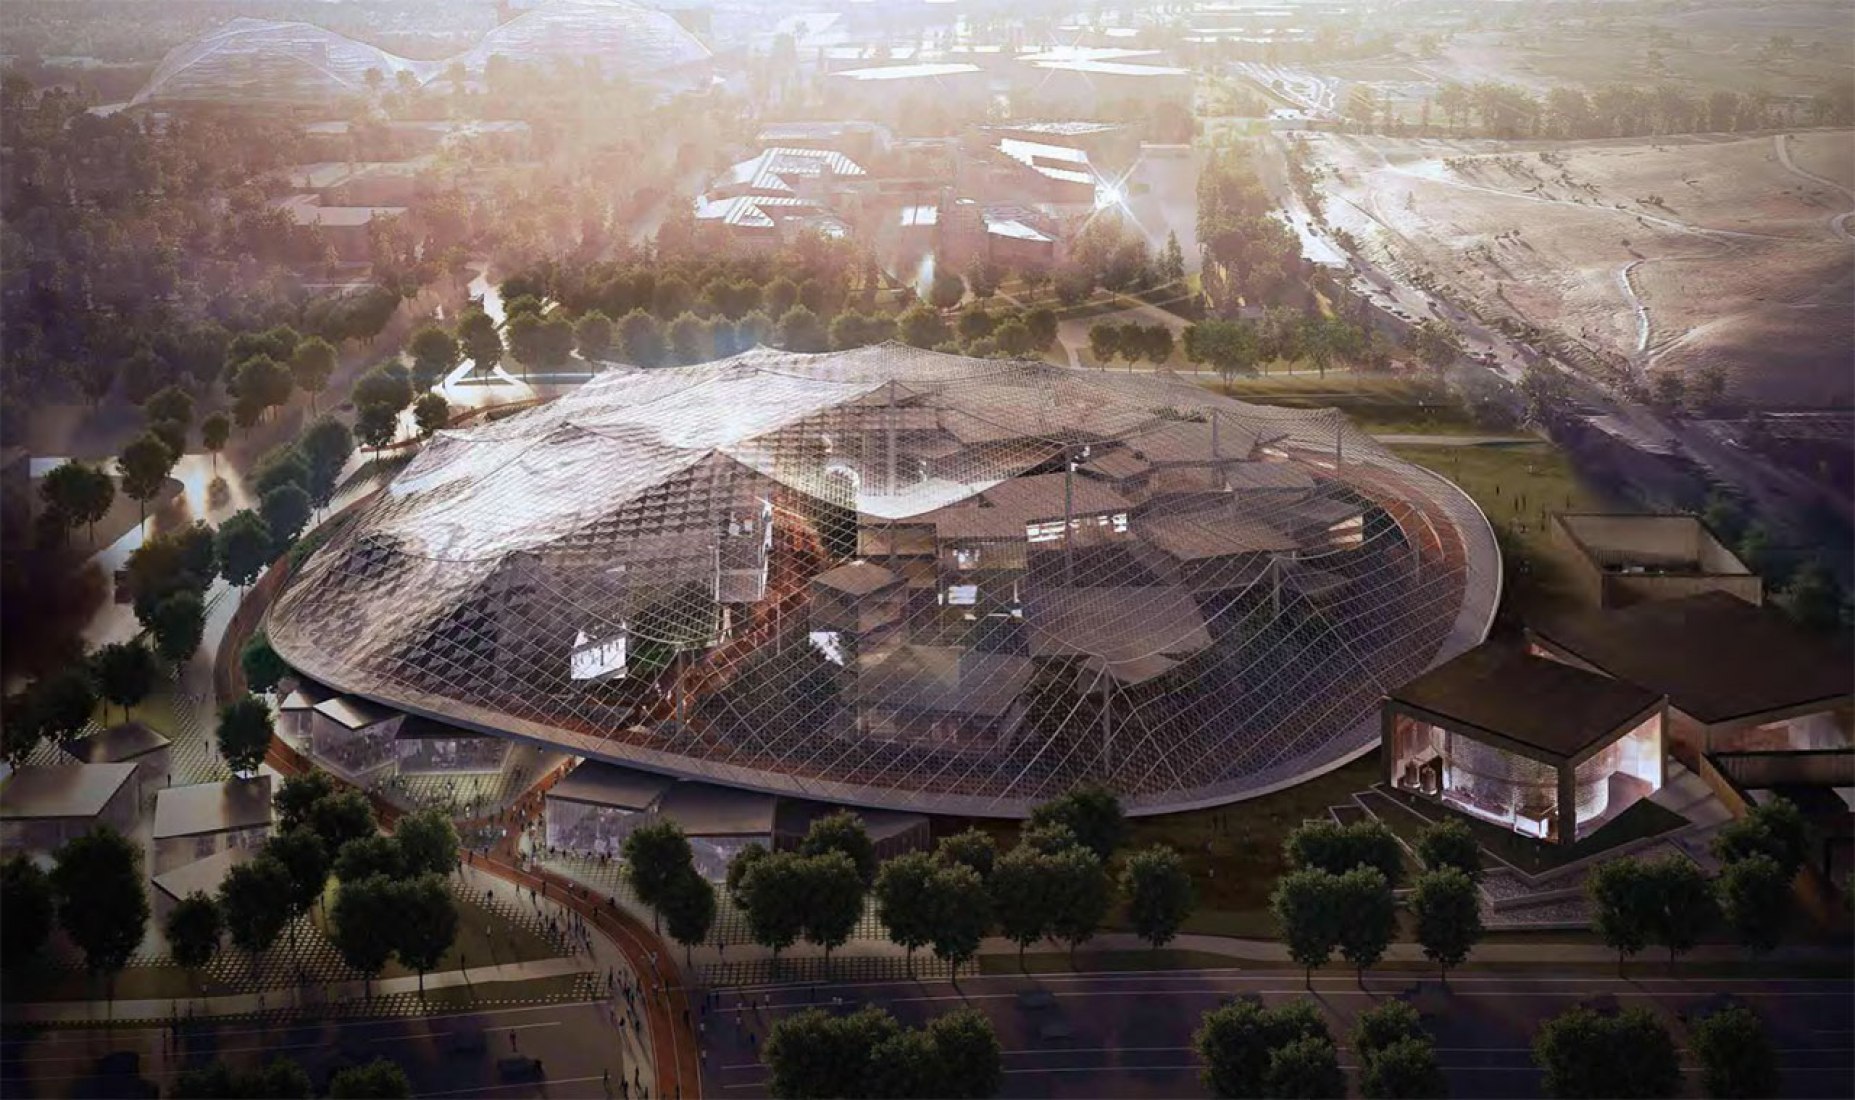 Overview, Rendering first project, May 2015. Plans for Google’s New Headquarters in California by BIG and Heatherwick